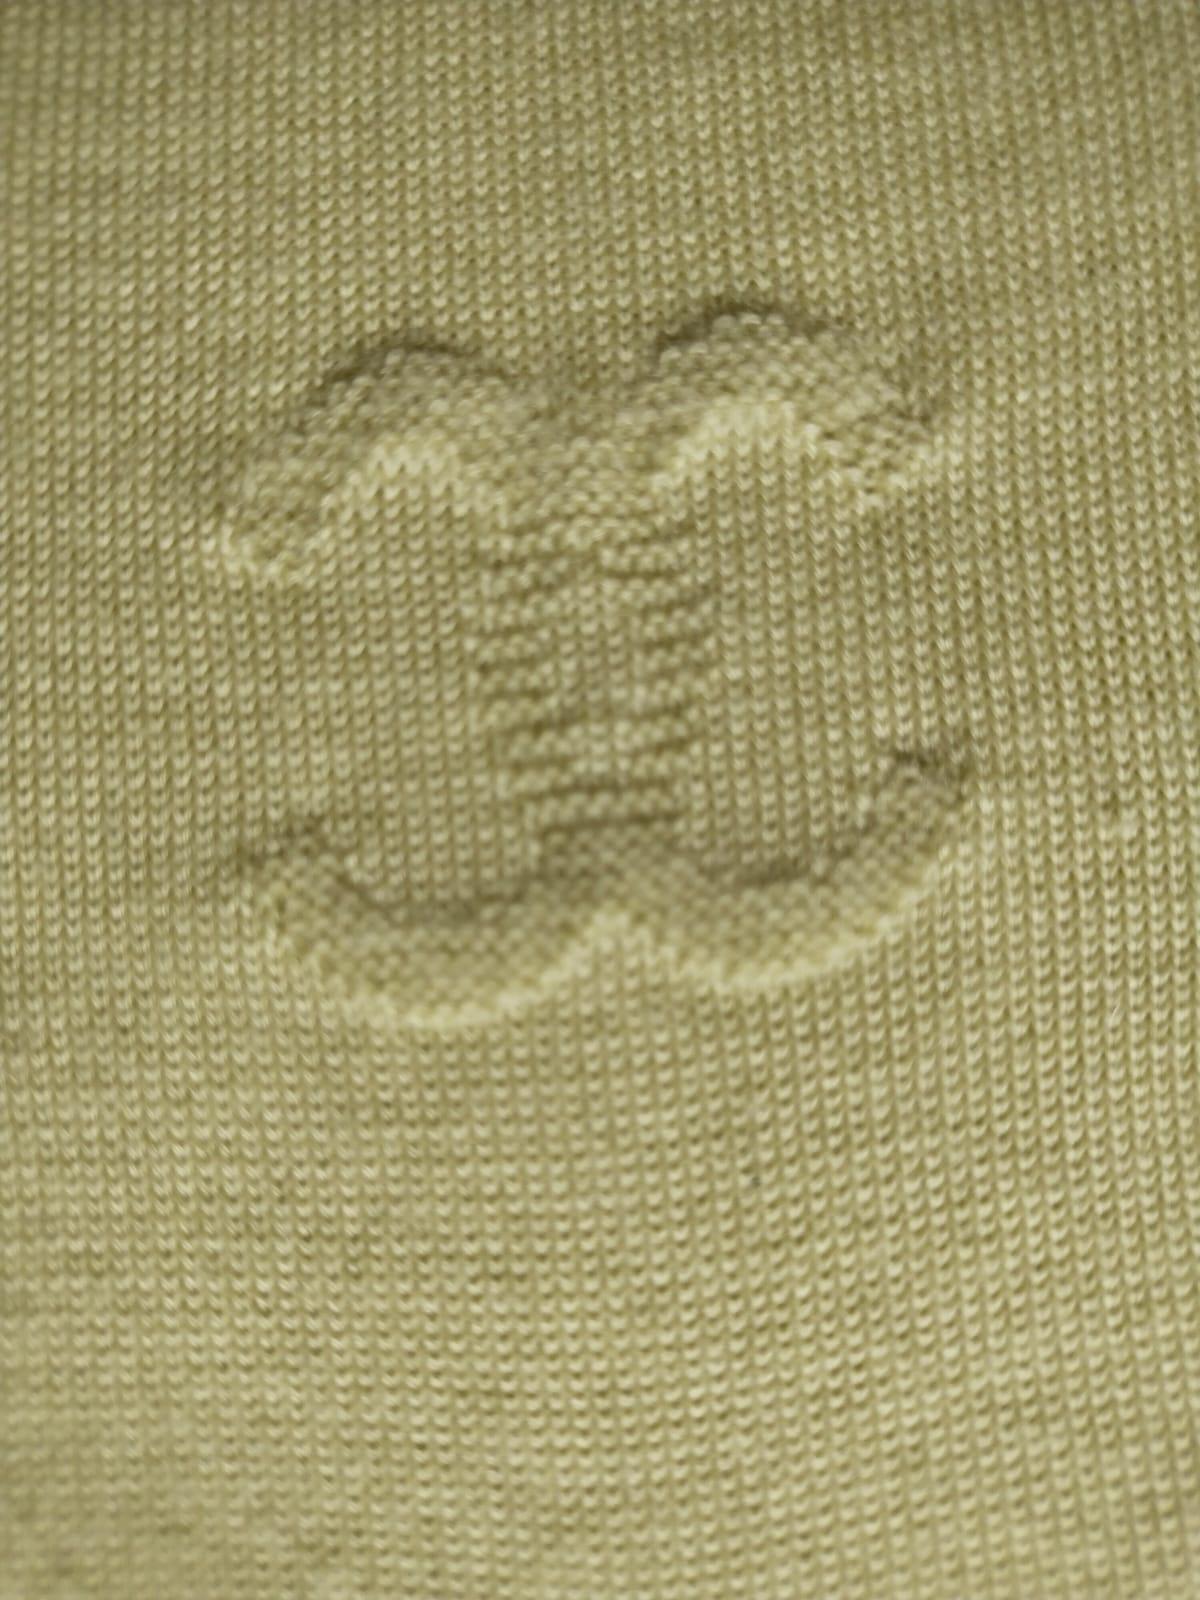 Chanel 04c 2004 cruise logo by Karl Lagerfeld cashmere light green sweater Pre-Owned
Chanel by Karl Lagerfeld
Collection: Cruise Collection 2004 year
Style: B2380 P22664V01478
Country of production: Italy
Composition: cashmere 100%

Details:
With